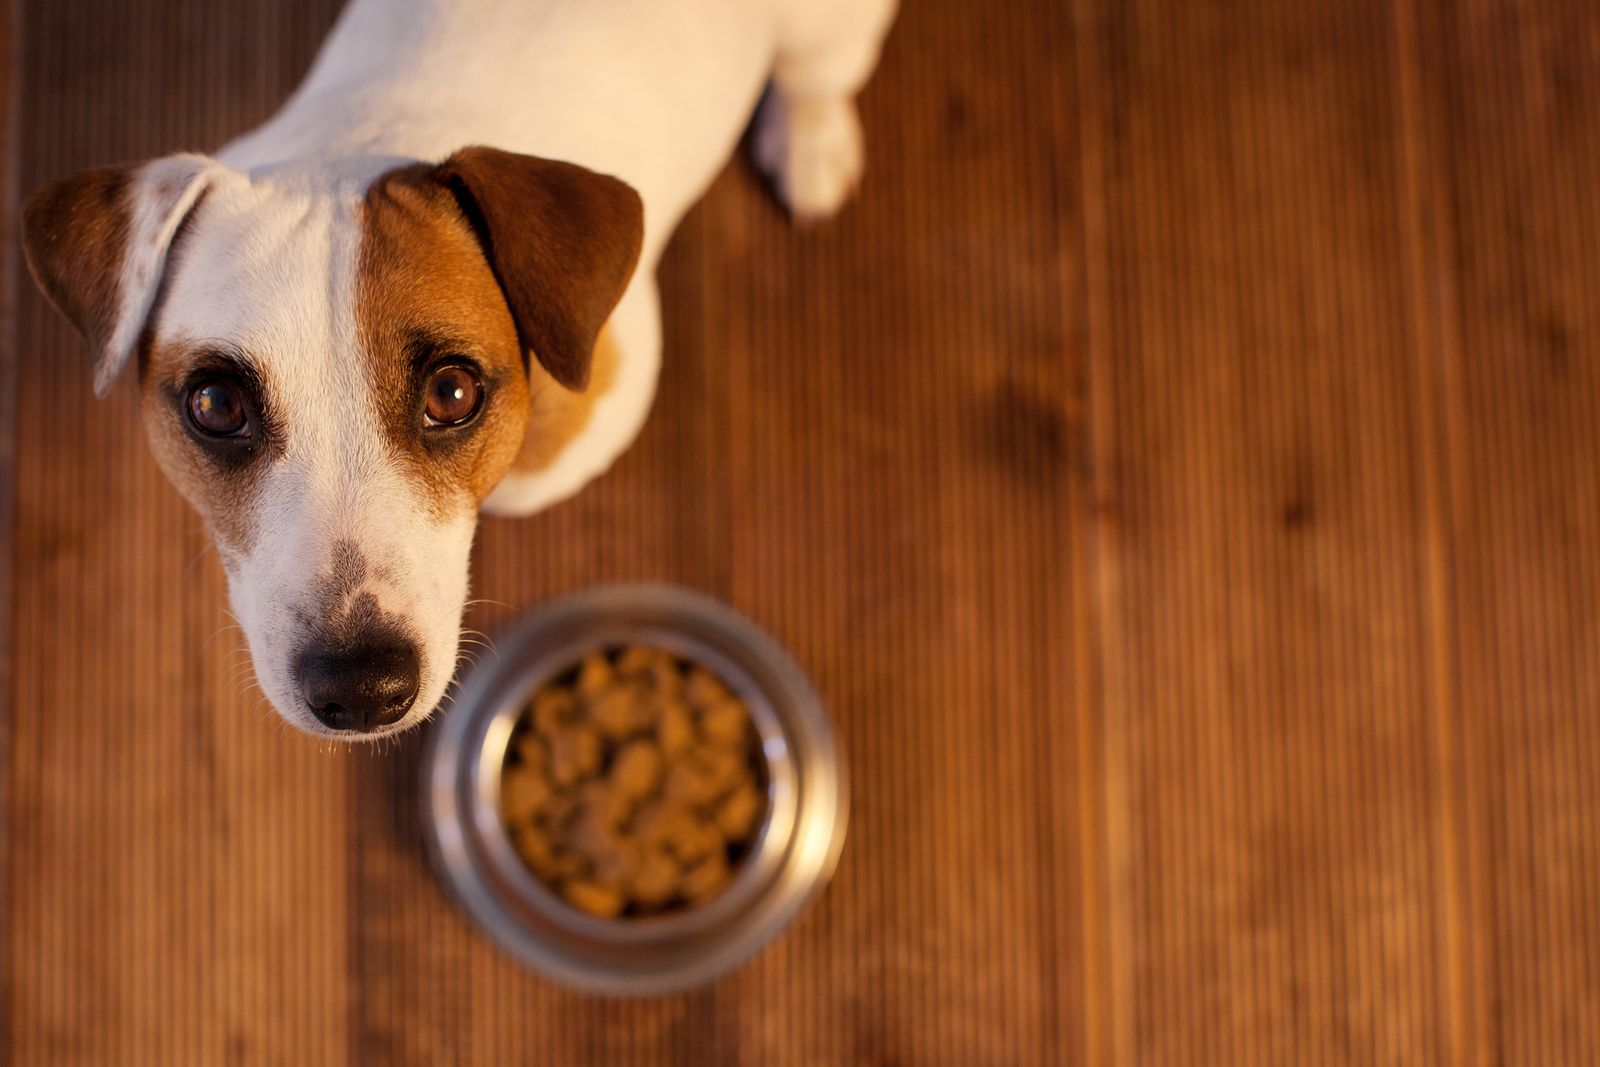 Why Dogs Stop Eating What to Do When Your Pet Won't Have Their Food